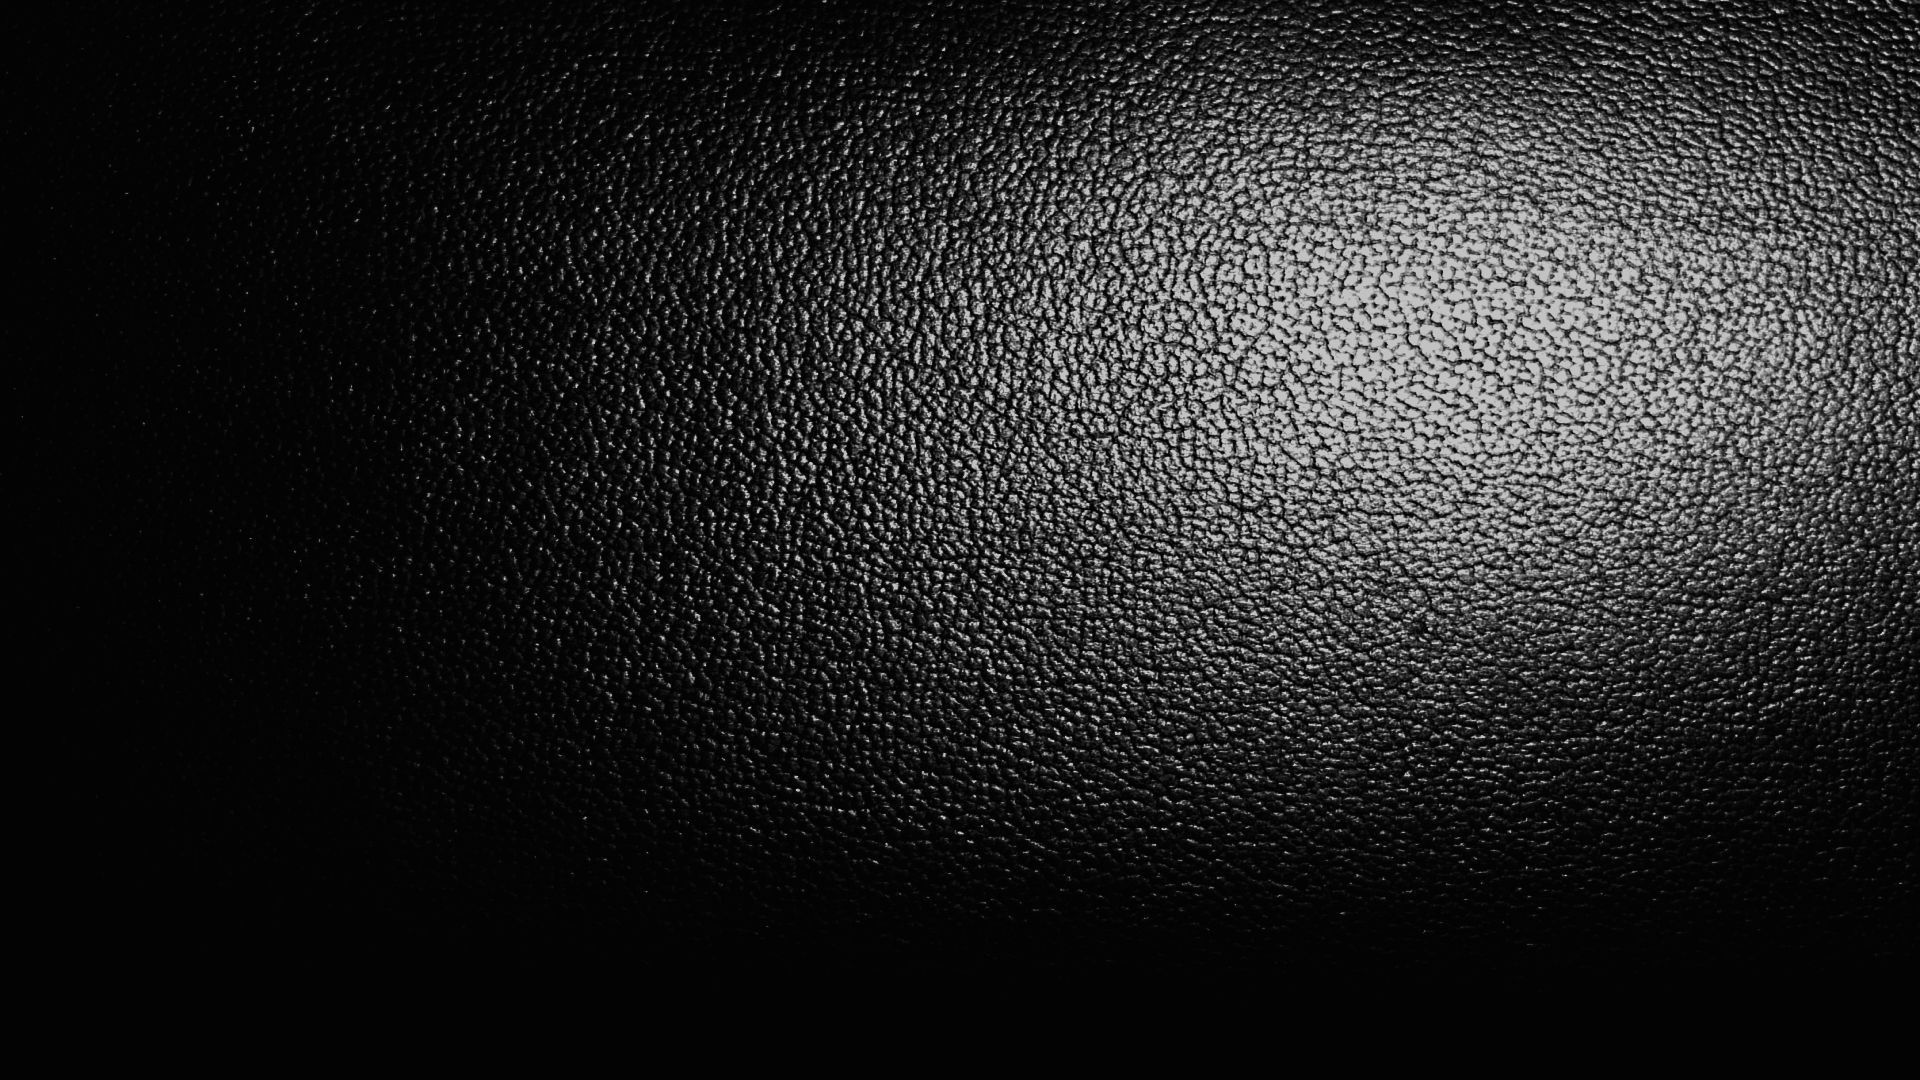 Leather Texture Wallpaper, HD Leather Texture Background on WallpaperBat